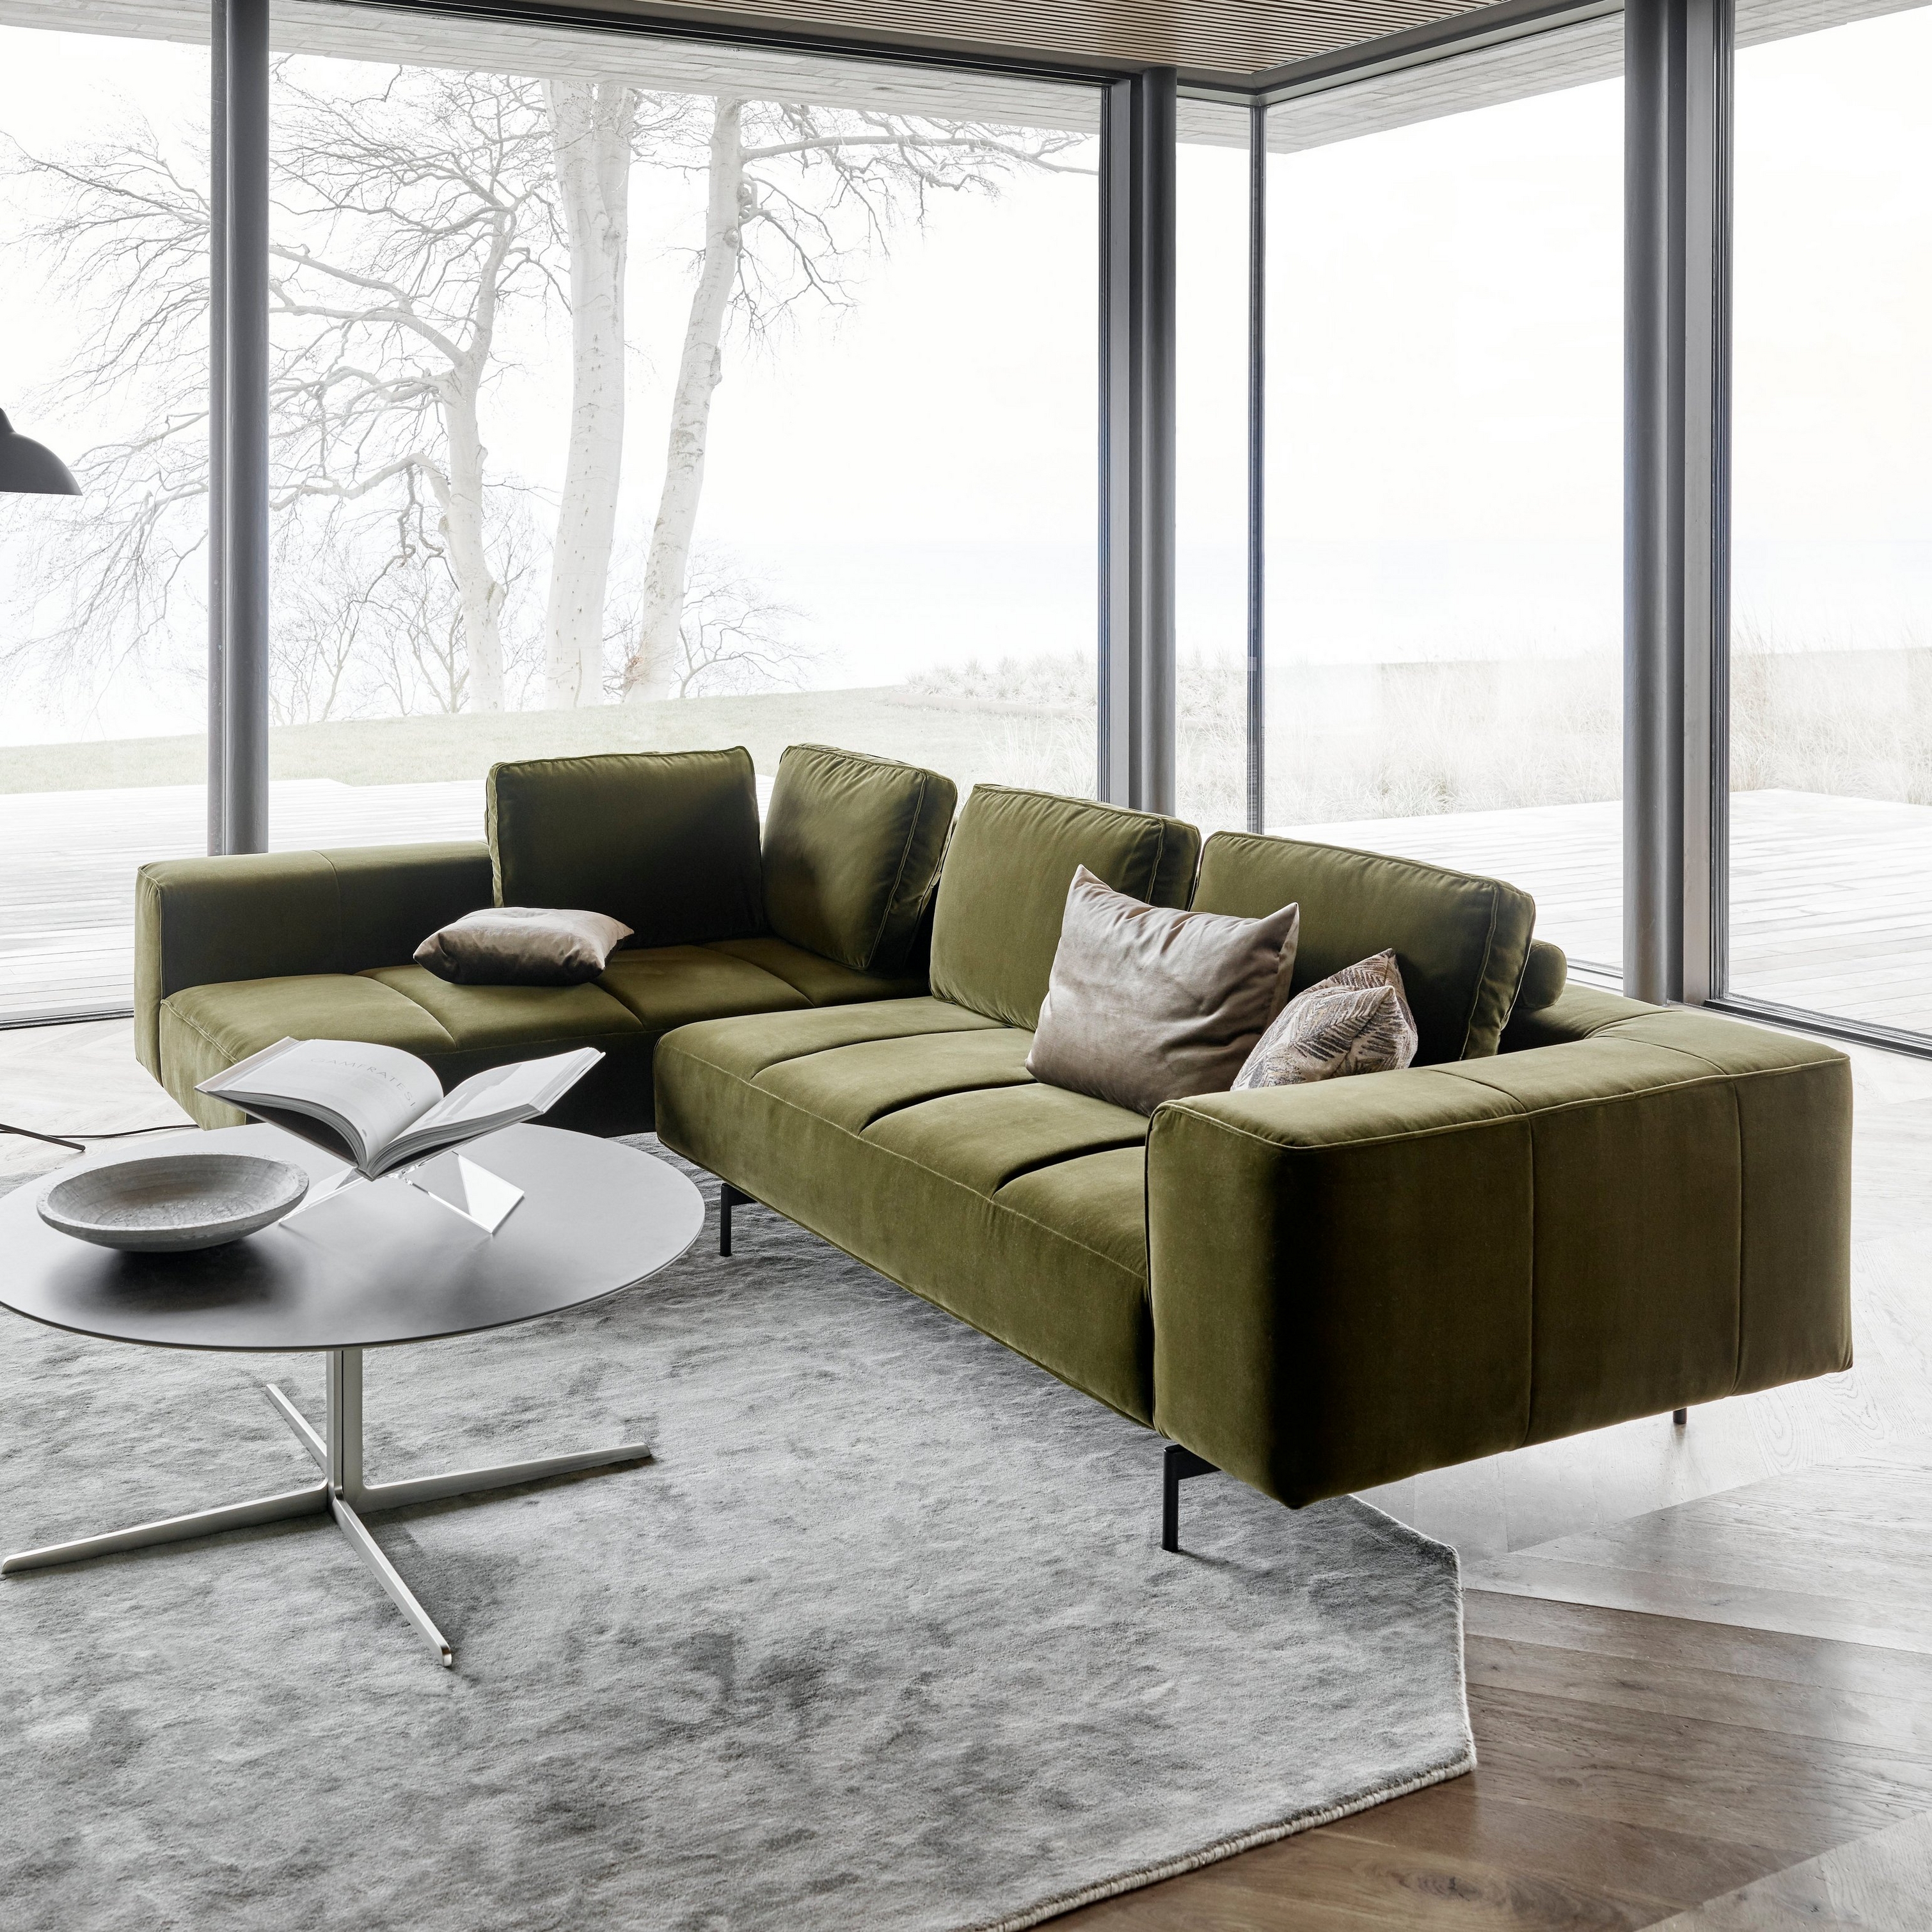 Modern green Amsterdam sofa, coffee table, floor lamp, by panoramic windows with a water view